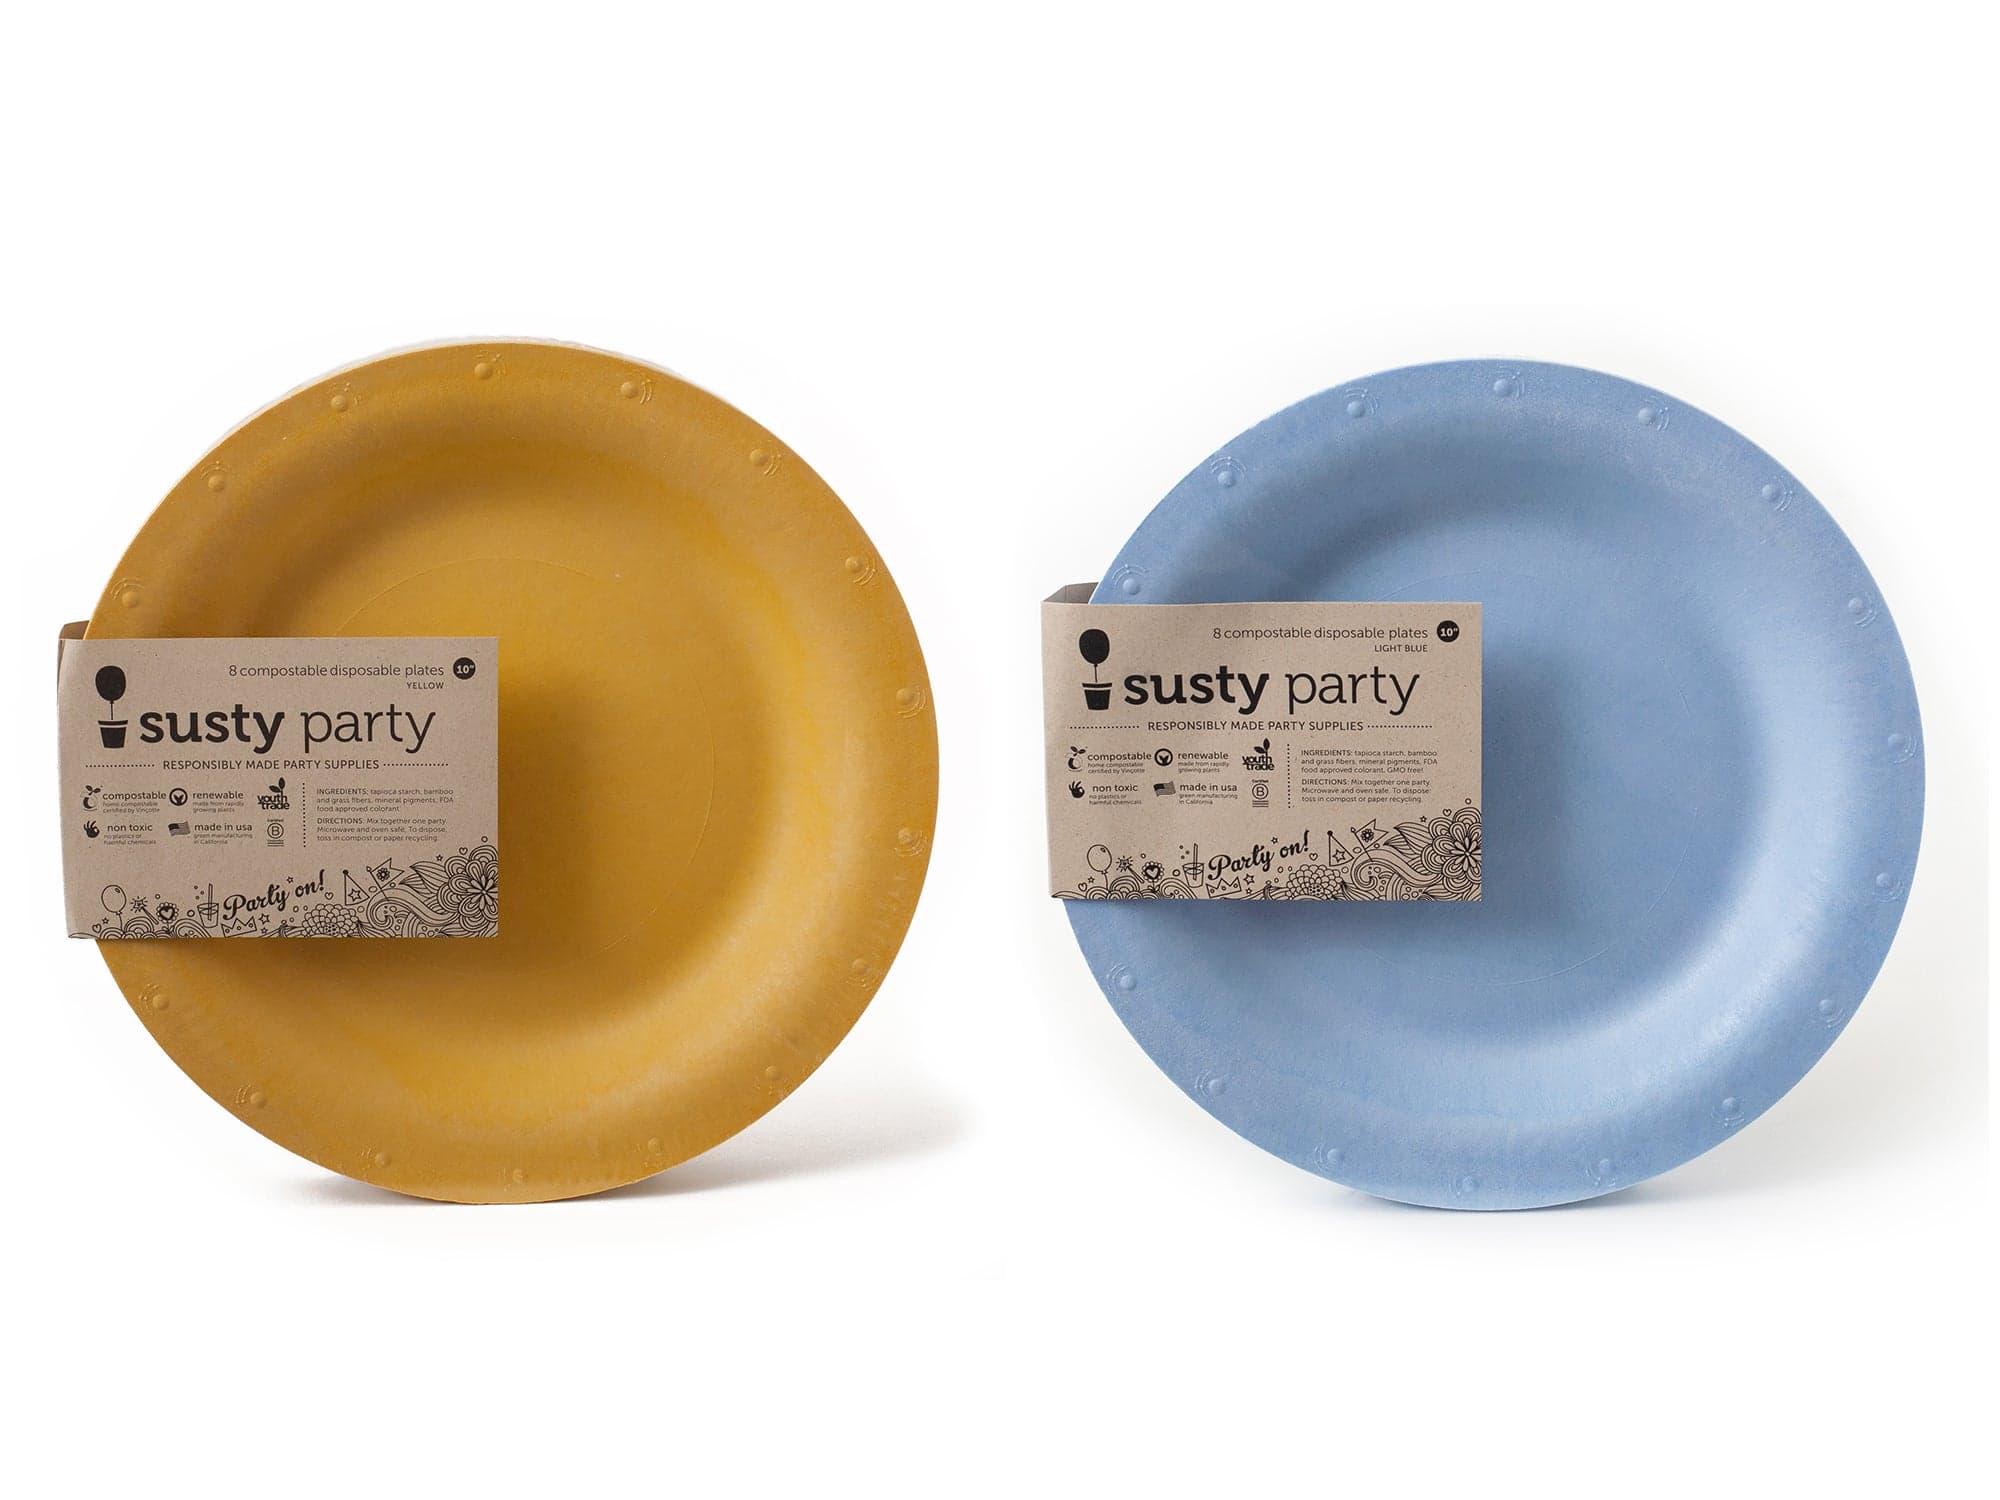 Susty Party compostable biodegradable plates